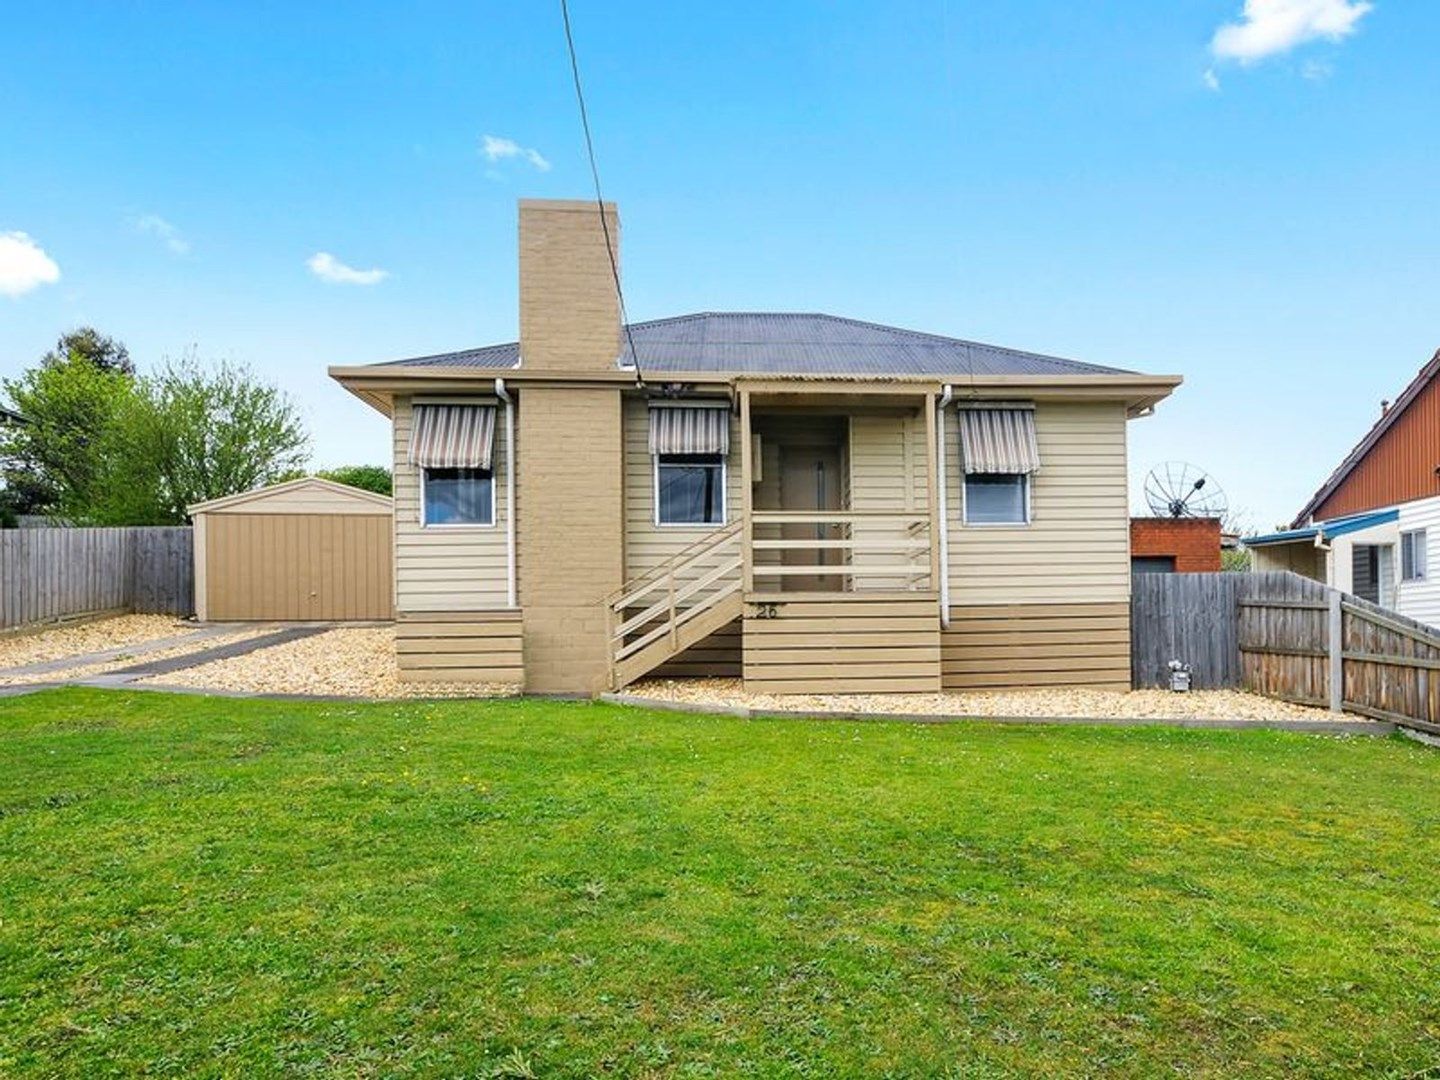 3 bedrooms House in 26 Cynthia Street MORWELL VIC, 3840